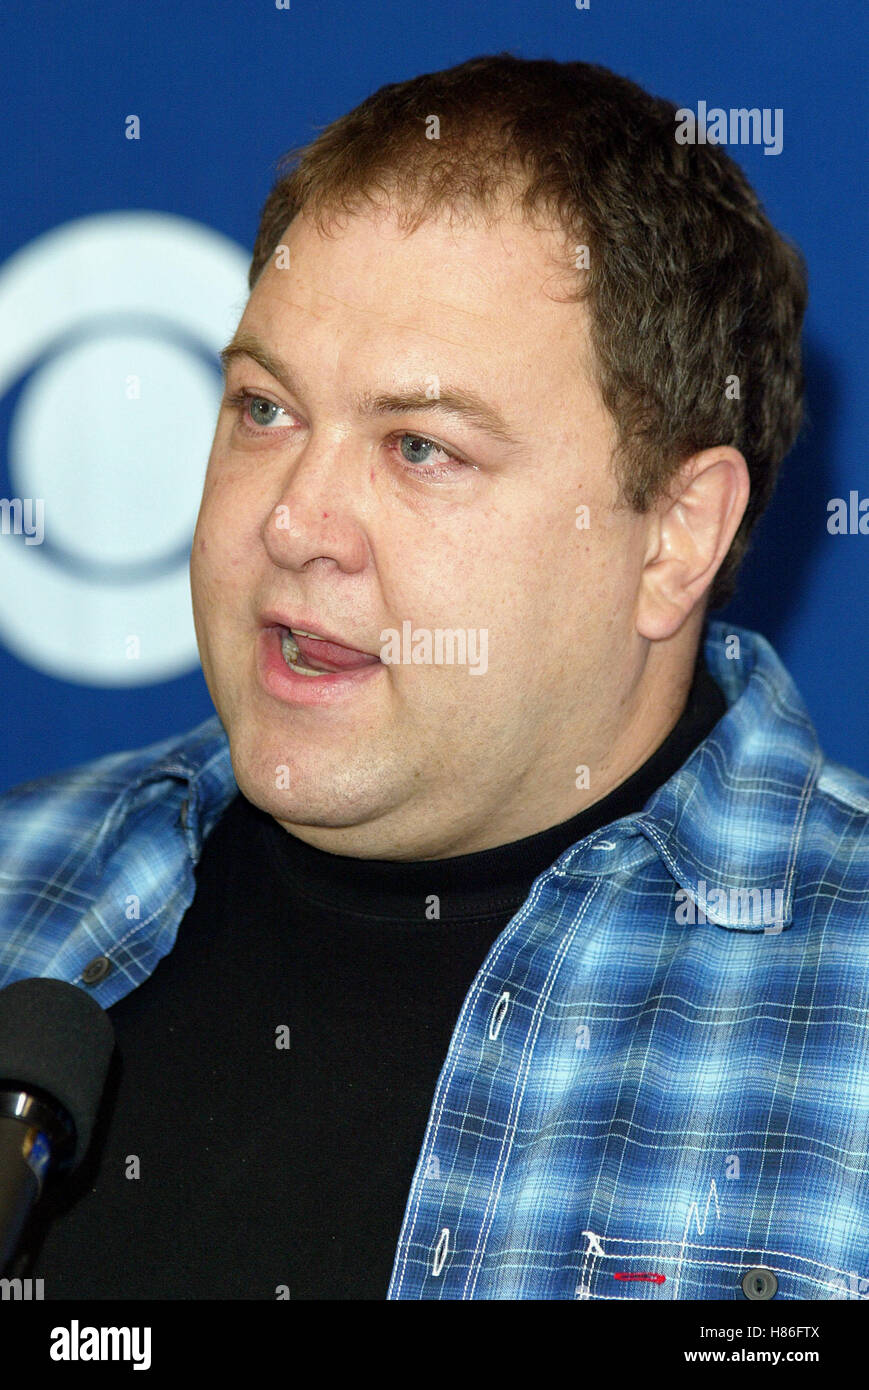 MARK ADDY LE 29ÈME PEOPLE'S CHOICE CANDIDATURES Beverly Hilton Hotel BEVERLY HILLS LOS ANGELES USA 04 décembre 2002 Banque D'Images